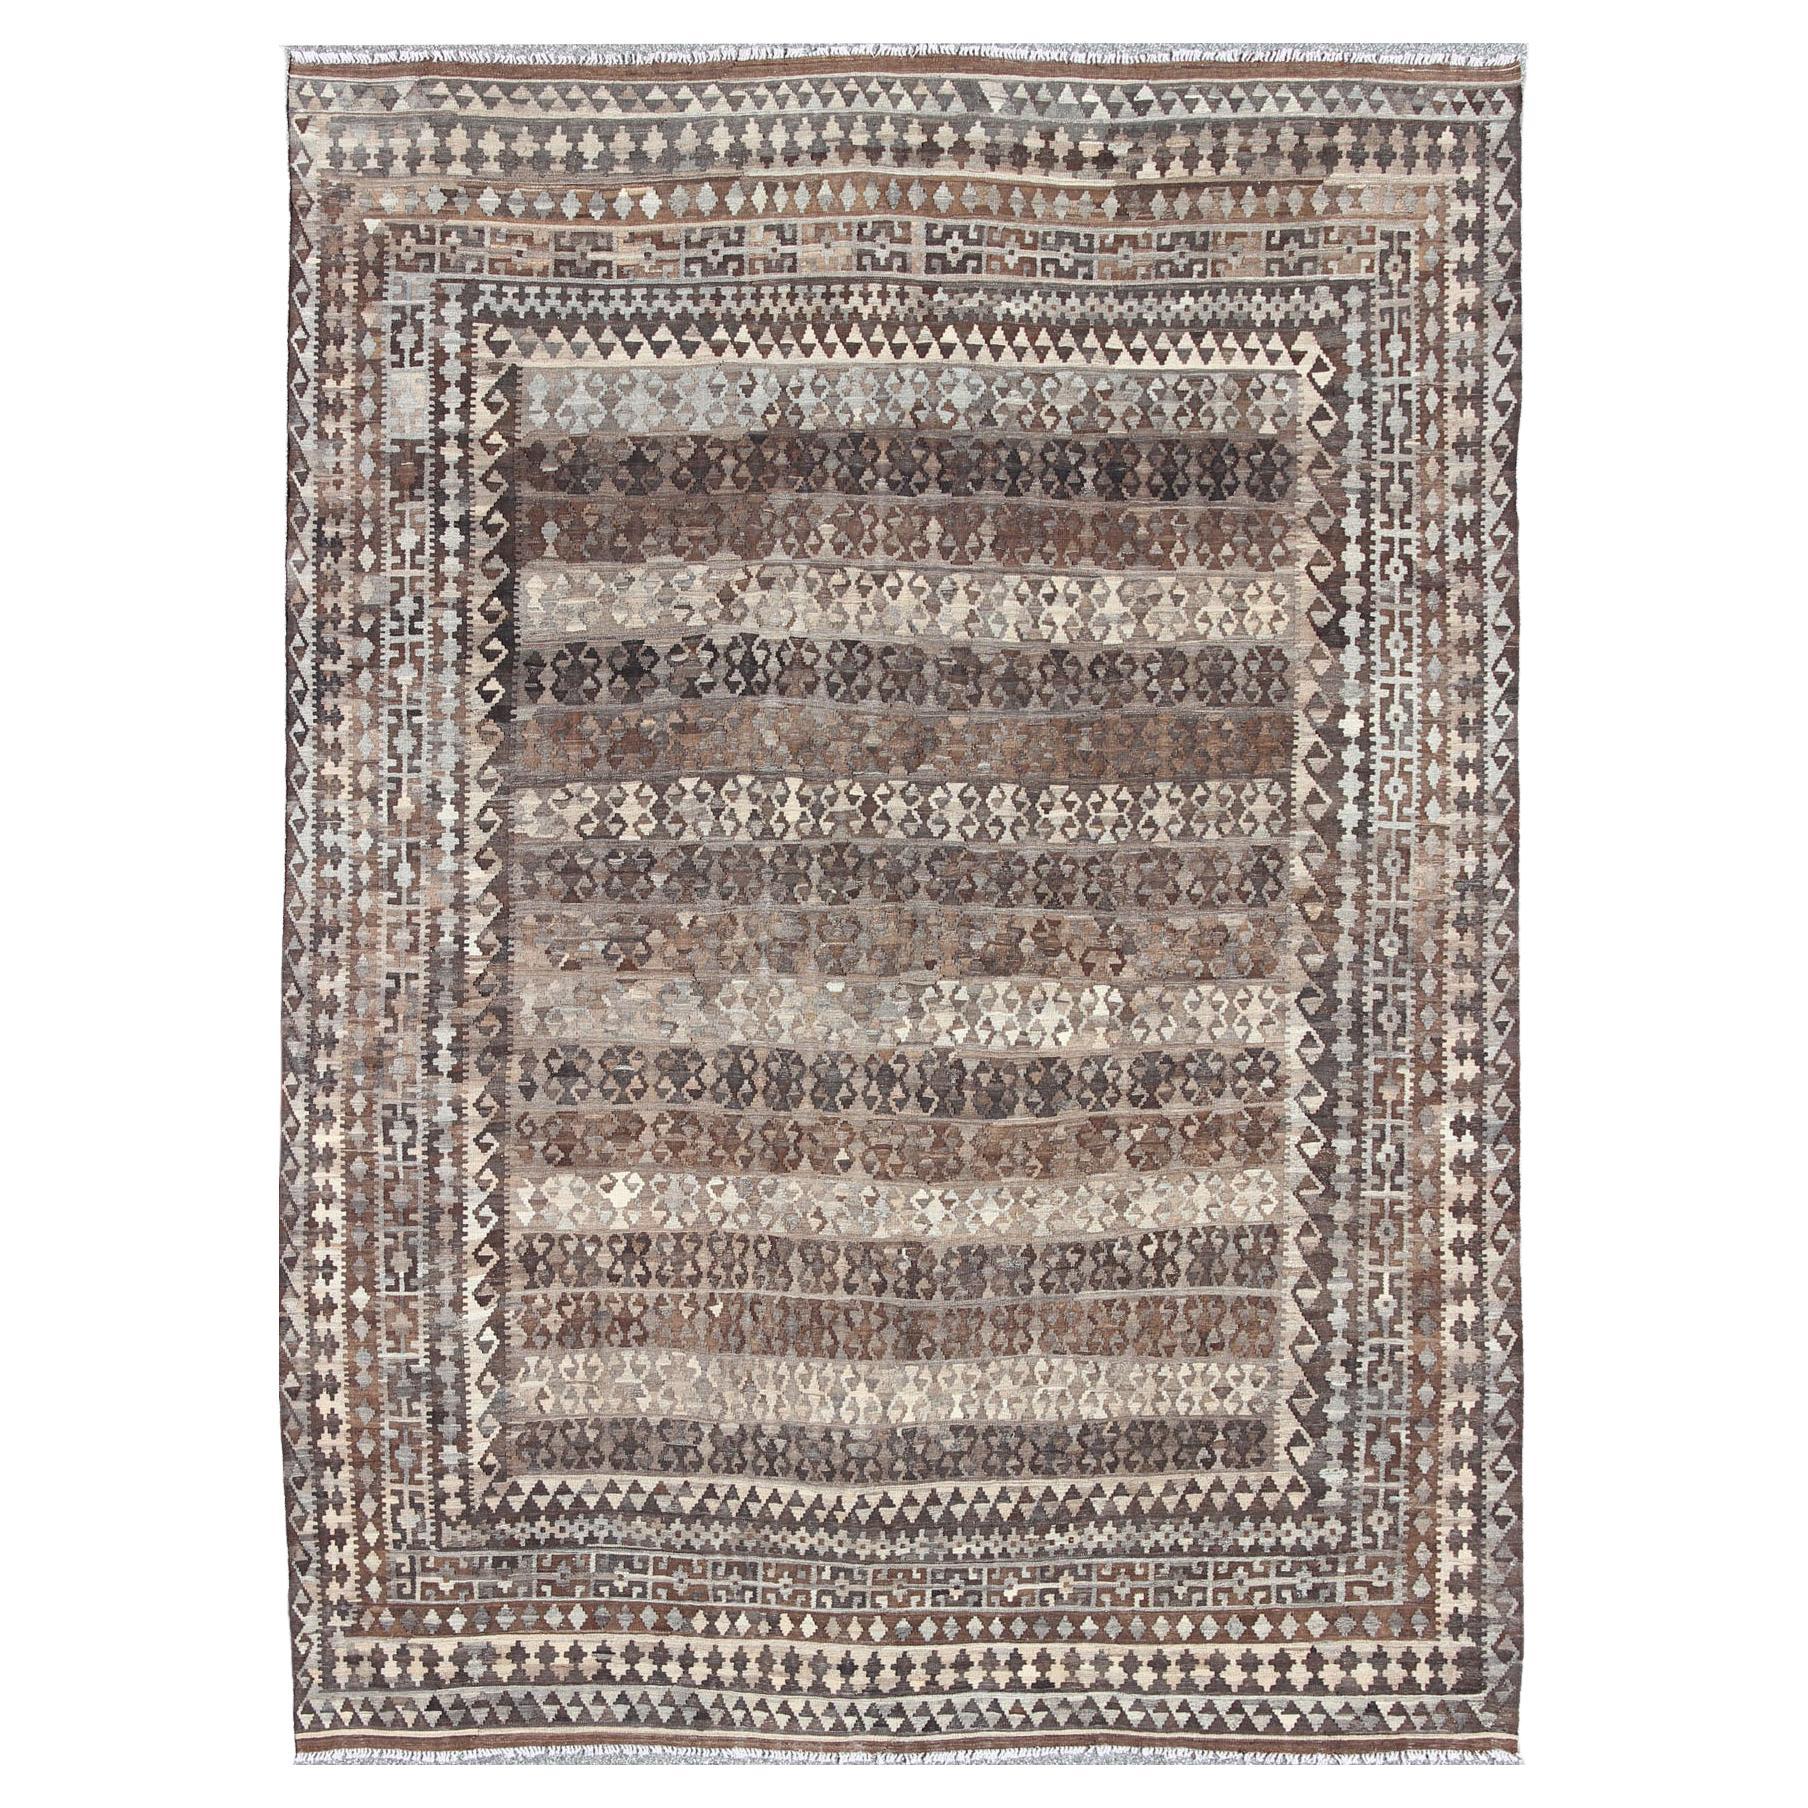 Modern Kilim in Natural Colors and Undyed Wool in Diamond Tribal Design